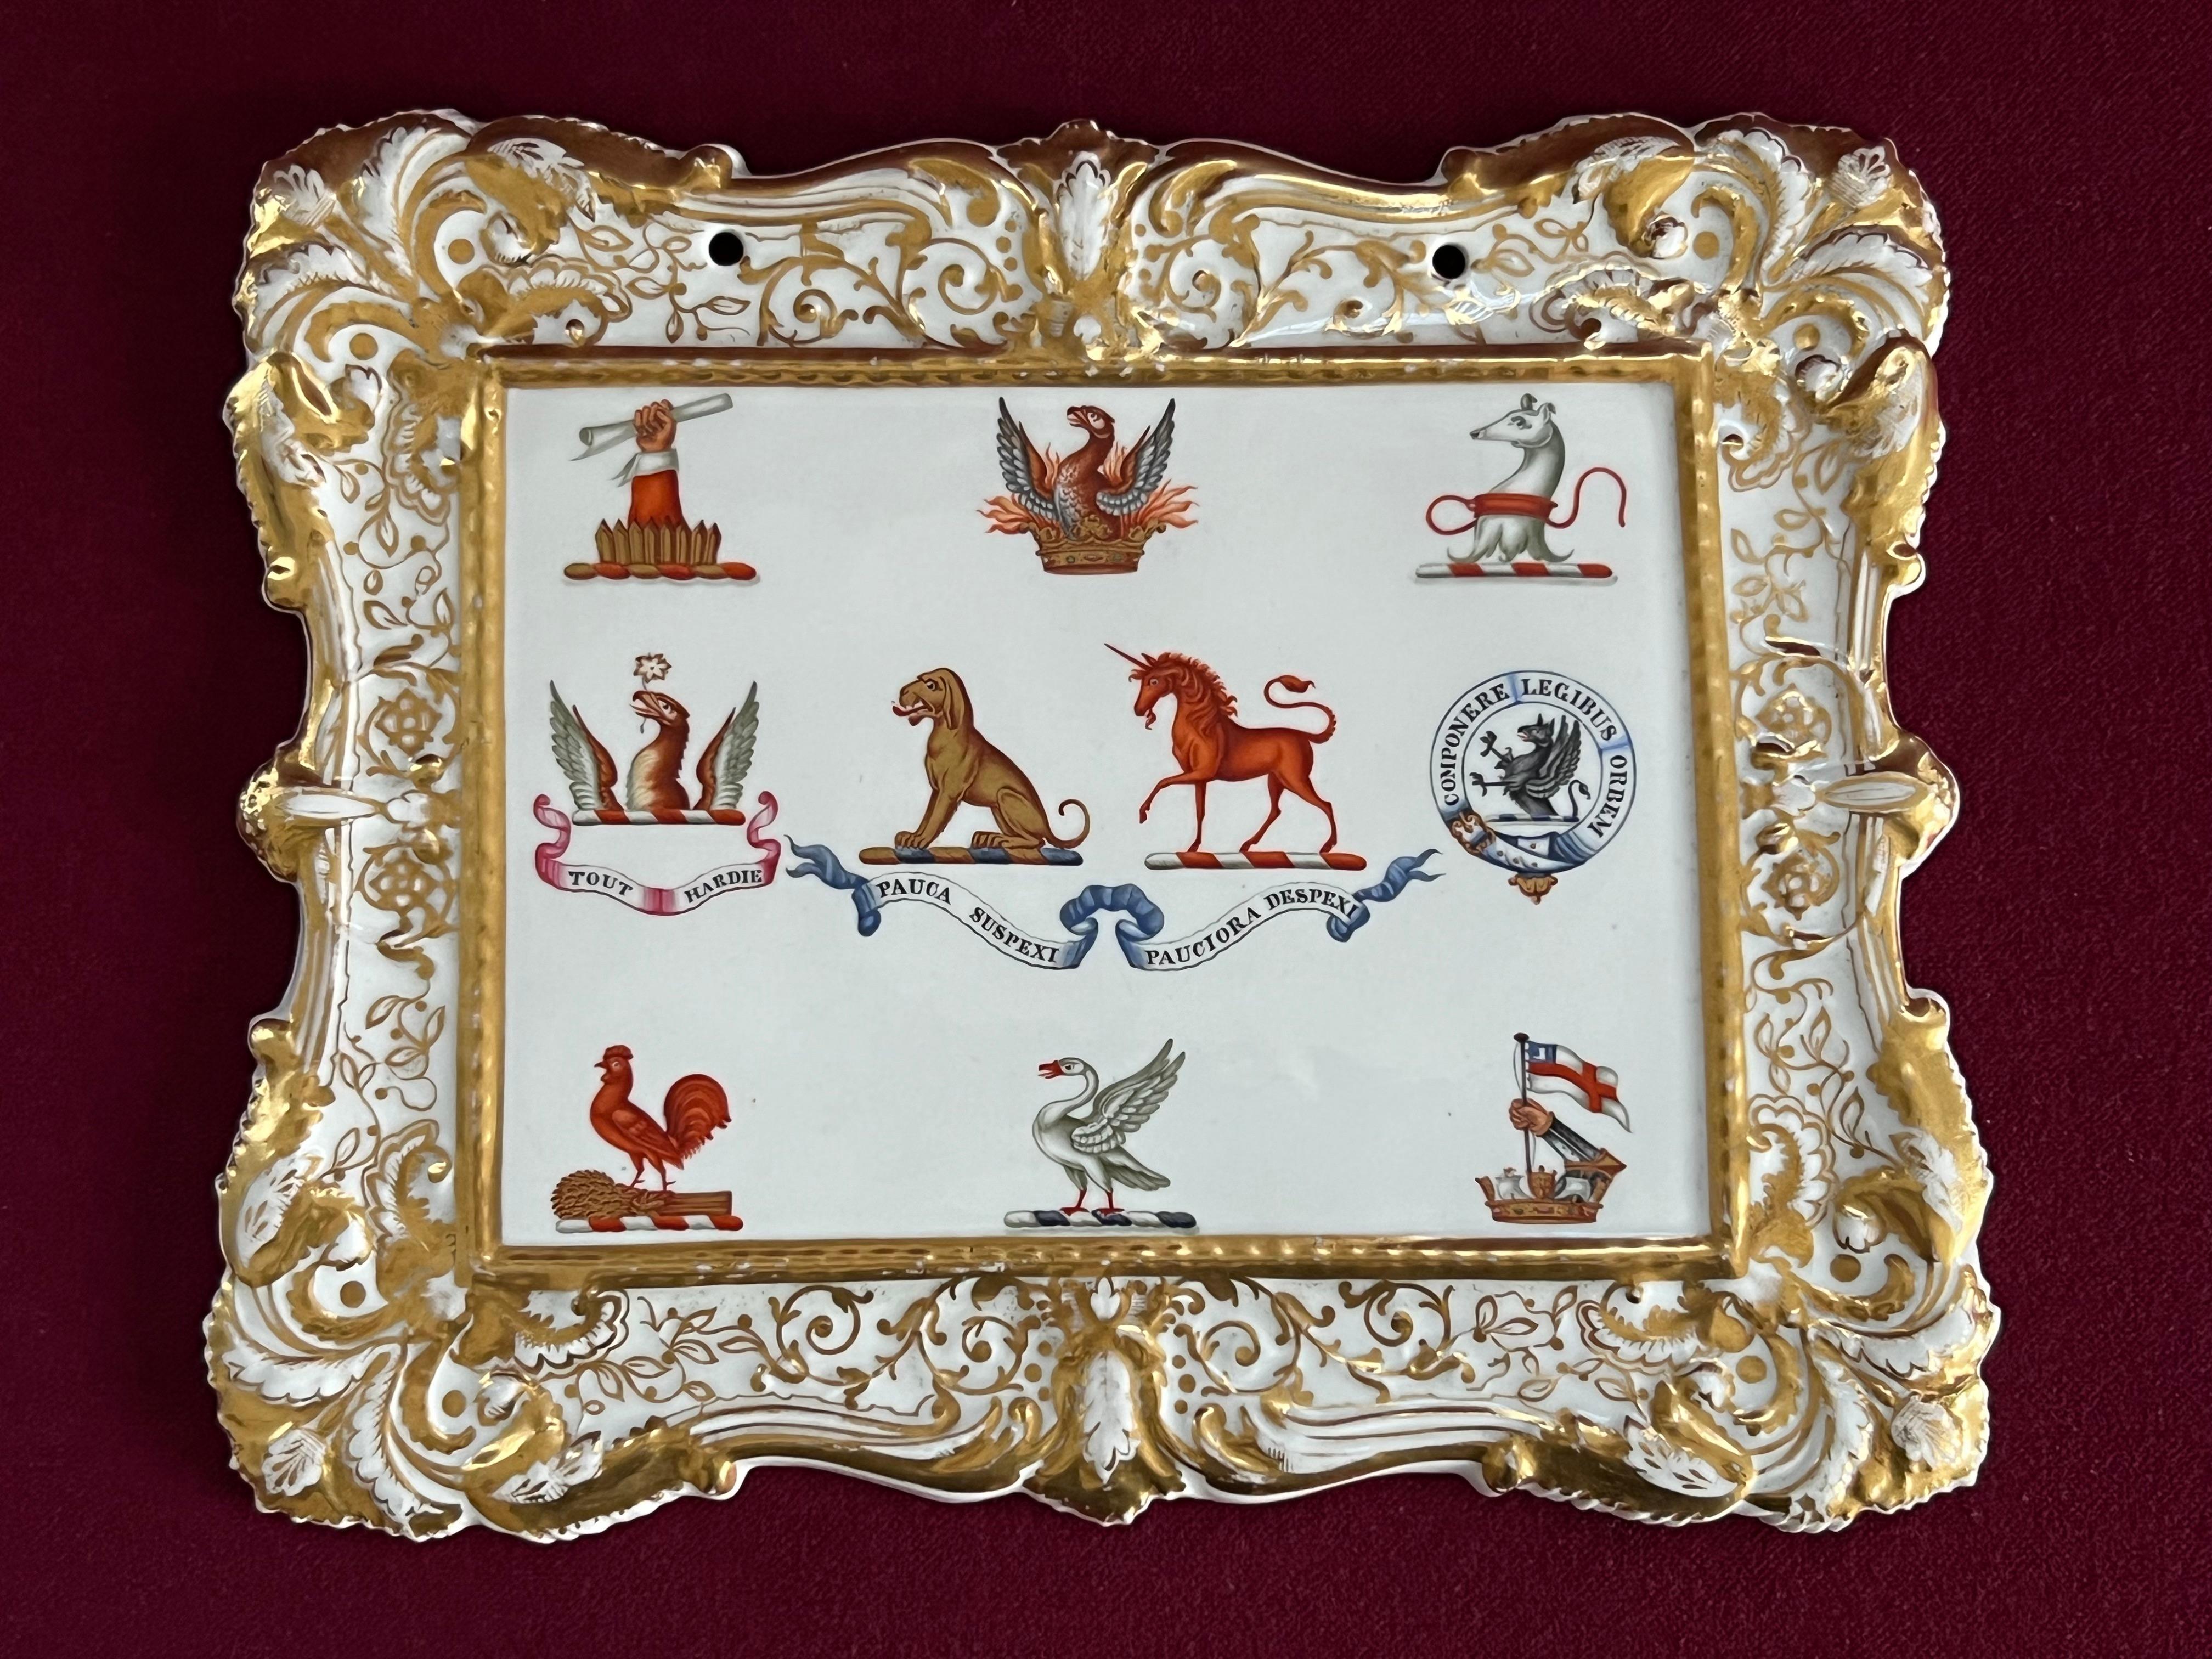 A Chamberlain & Co Worcester Amorial Crest Sample Plaque c.1840. This plaque was probably hung in the Chamberlain New Bond Street showroom to illustrate the various crests which could be added to a special order such as tea sets, dinner and dessert